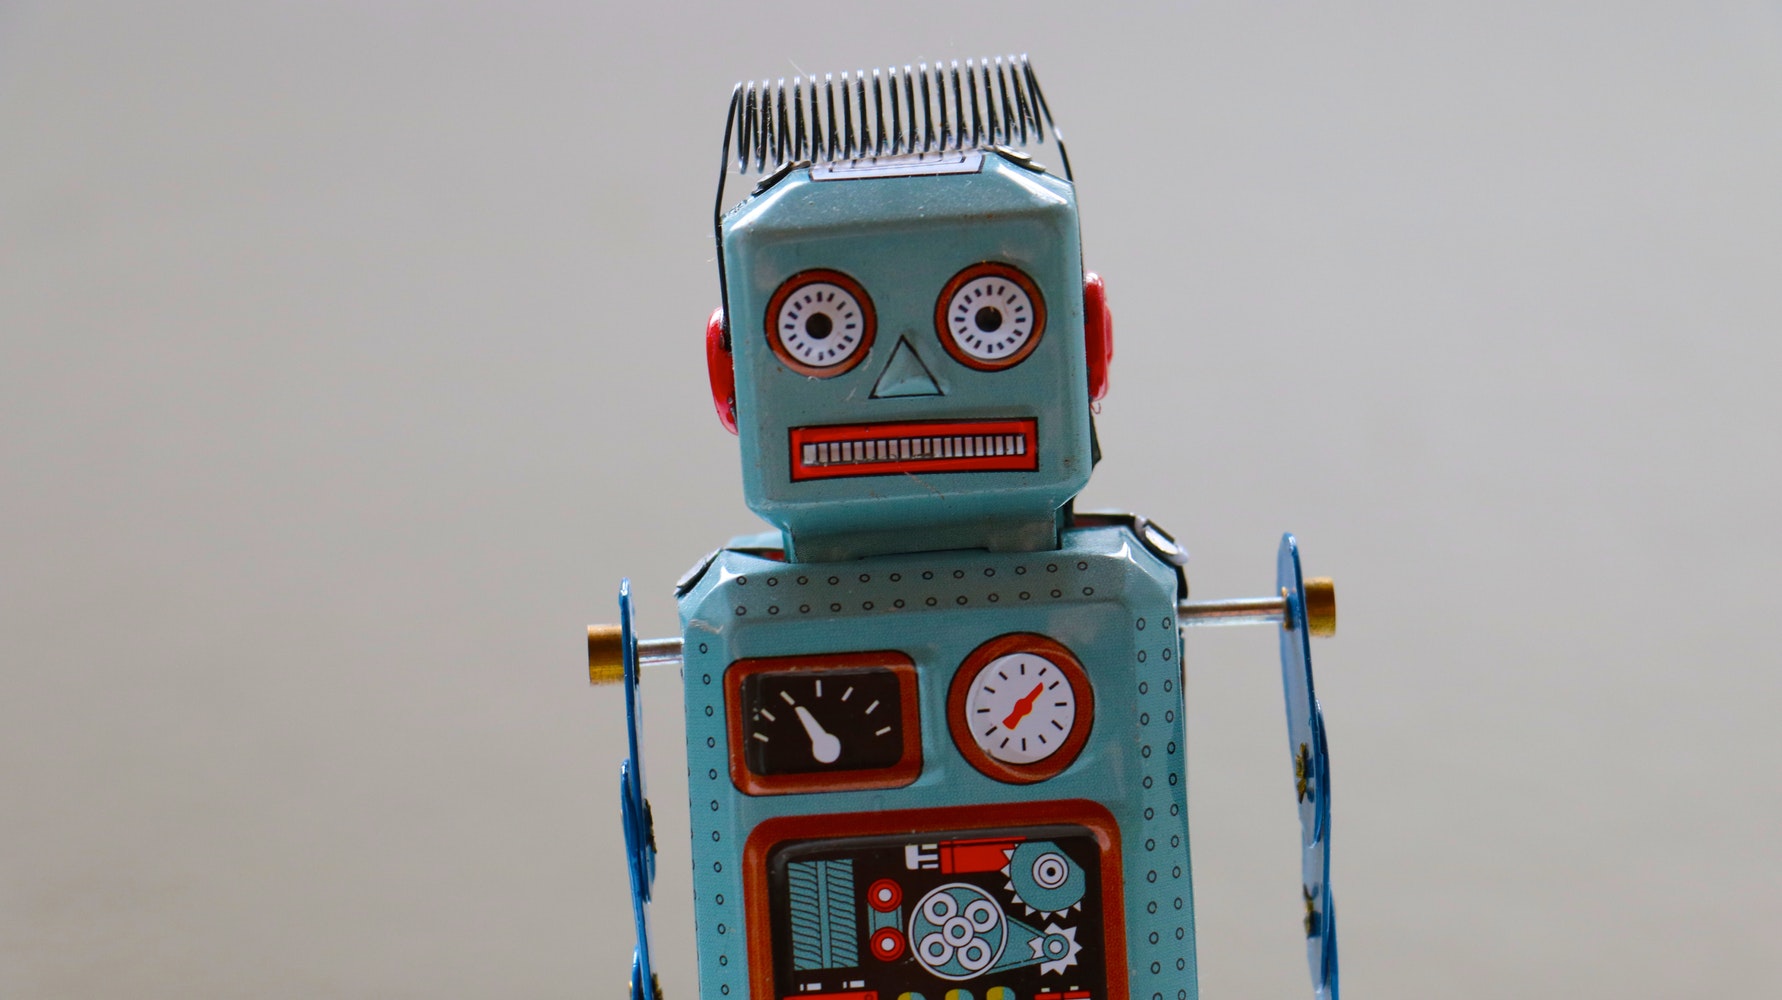 WordPress 5.3 to Use Robots Meta Tag to Better Discourage Search Engines from Listing Sites